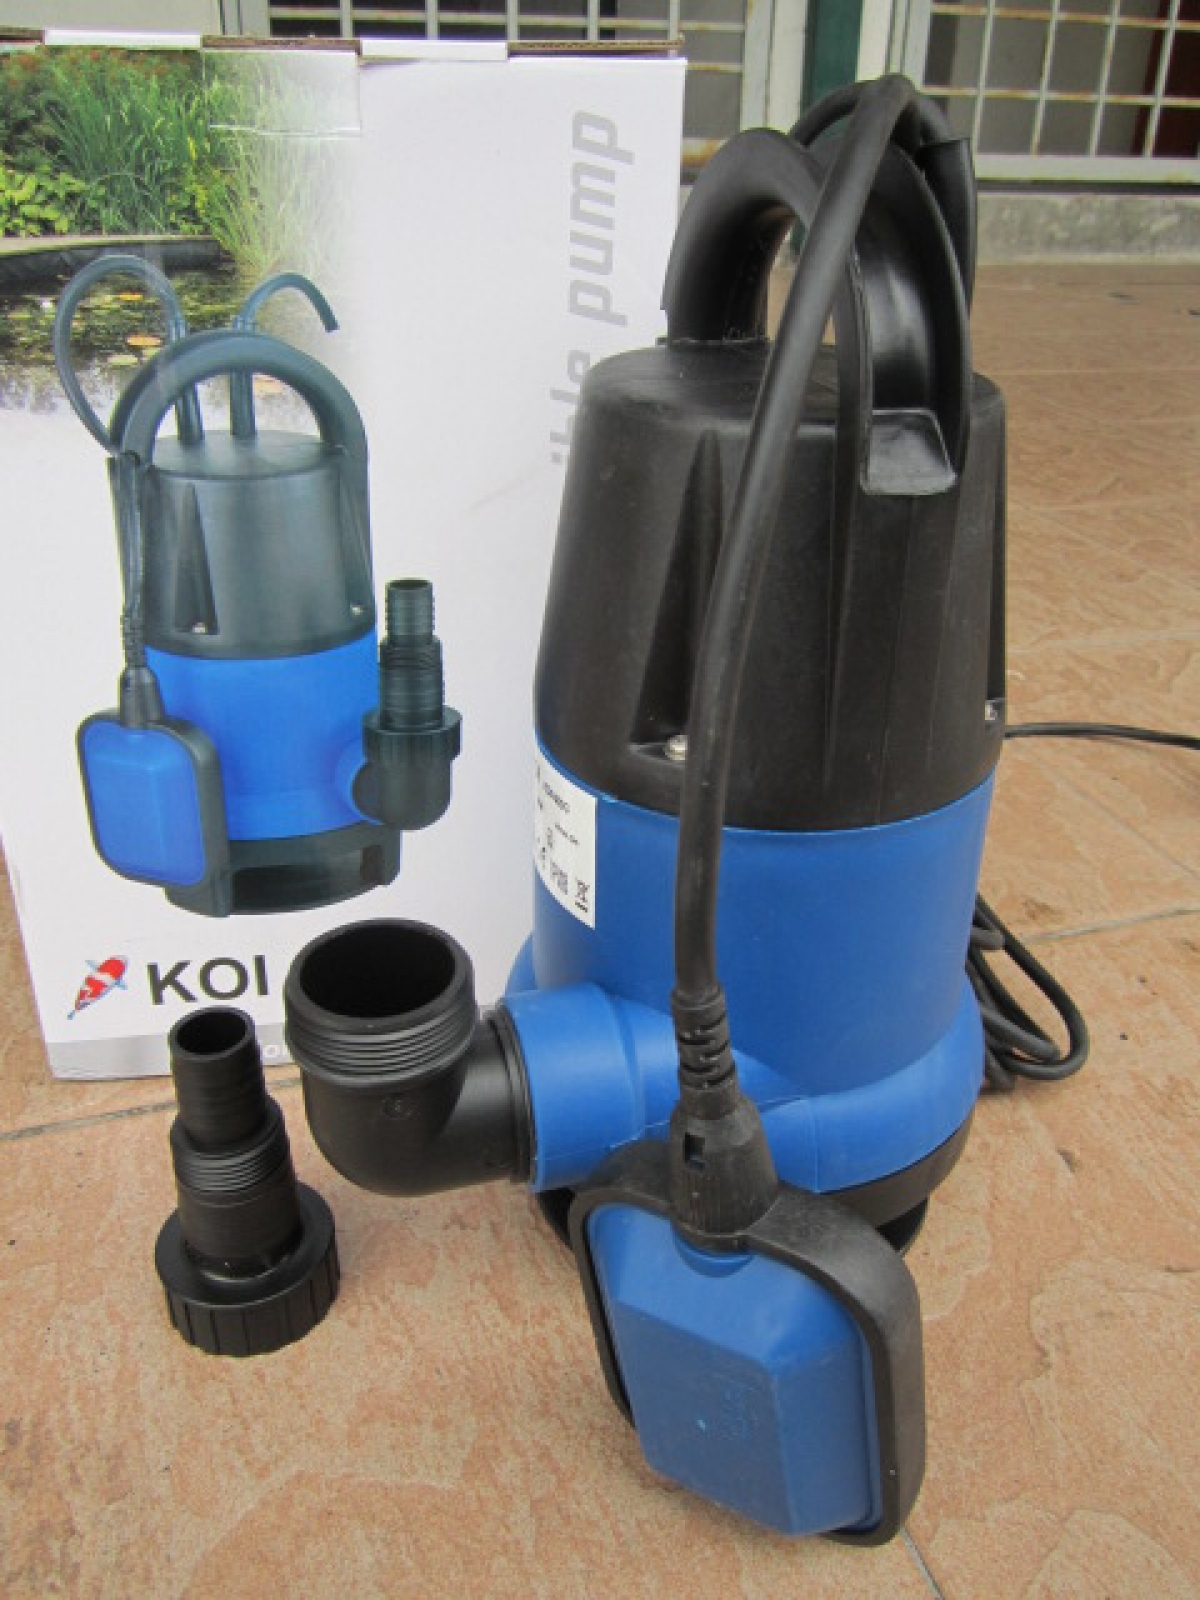 MY Professional 400W Koi Pond Submersible Pump – MY Power Tools